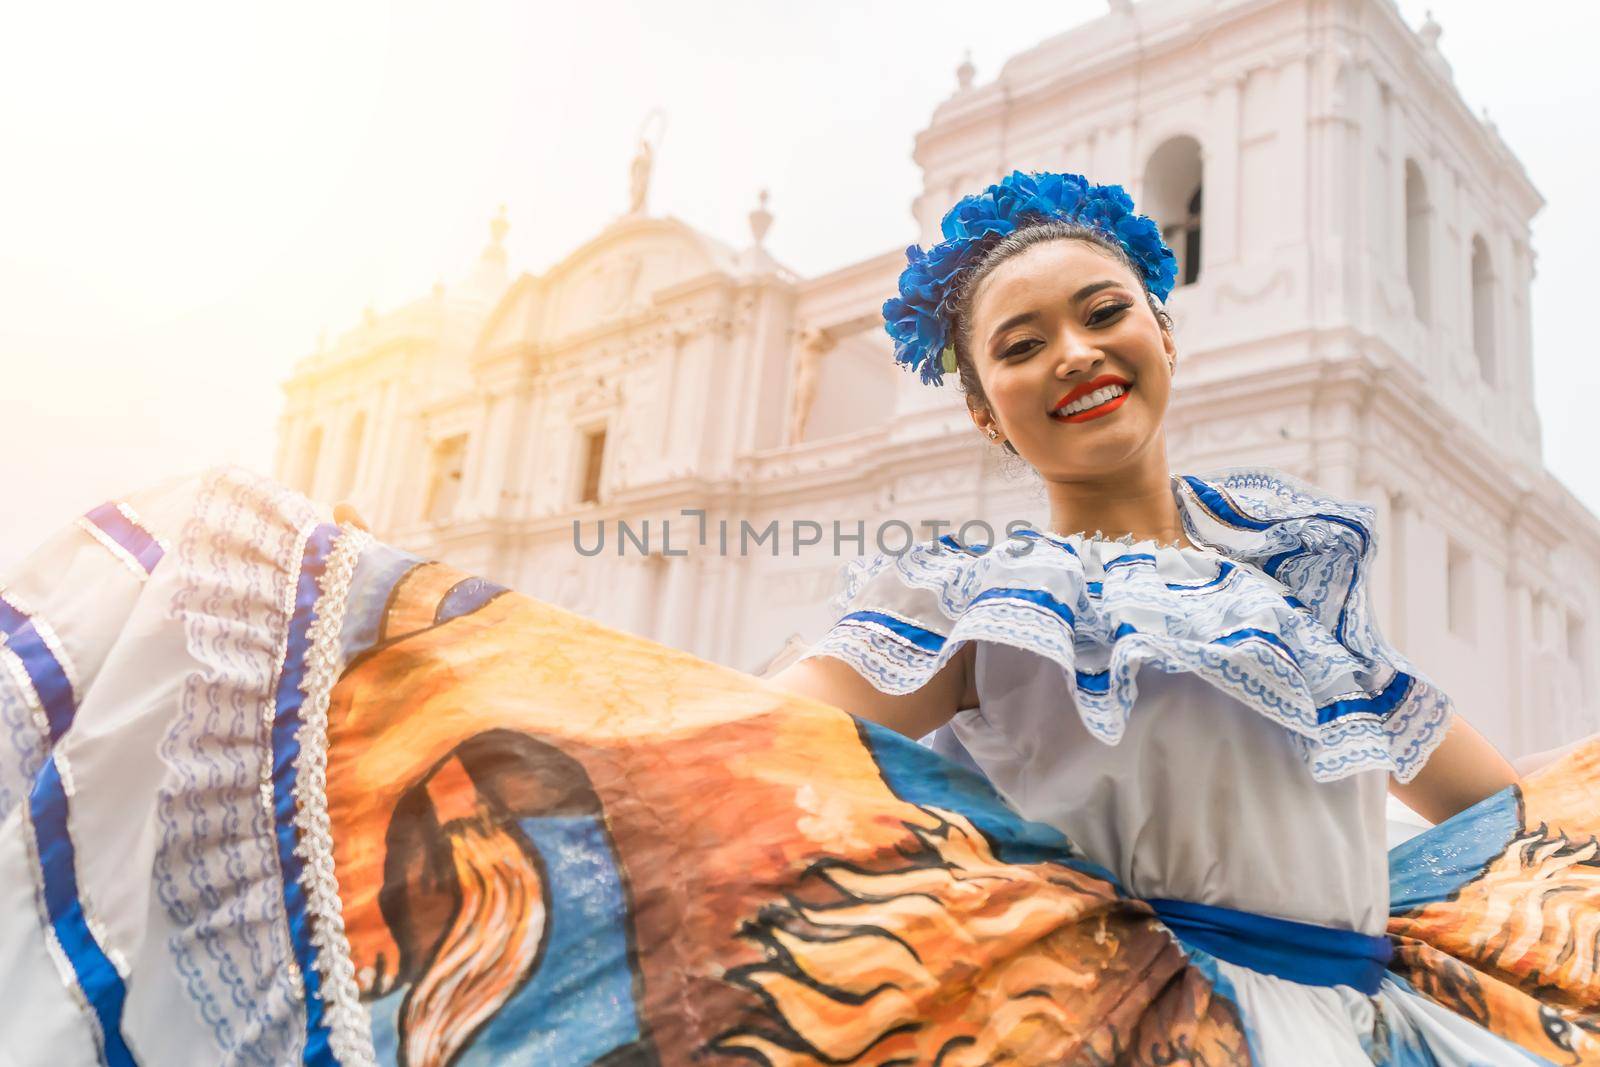 Nicaraguan folklore dancer smiling and looking at the camera outside the cathedral church in the central park of the city of Leon. The woman wears the typical dress of Central America and similar to countries of South America and Mexico.